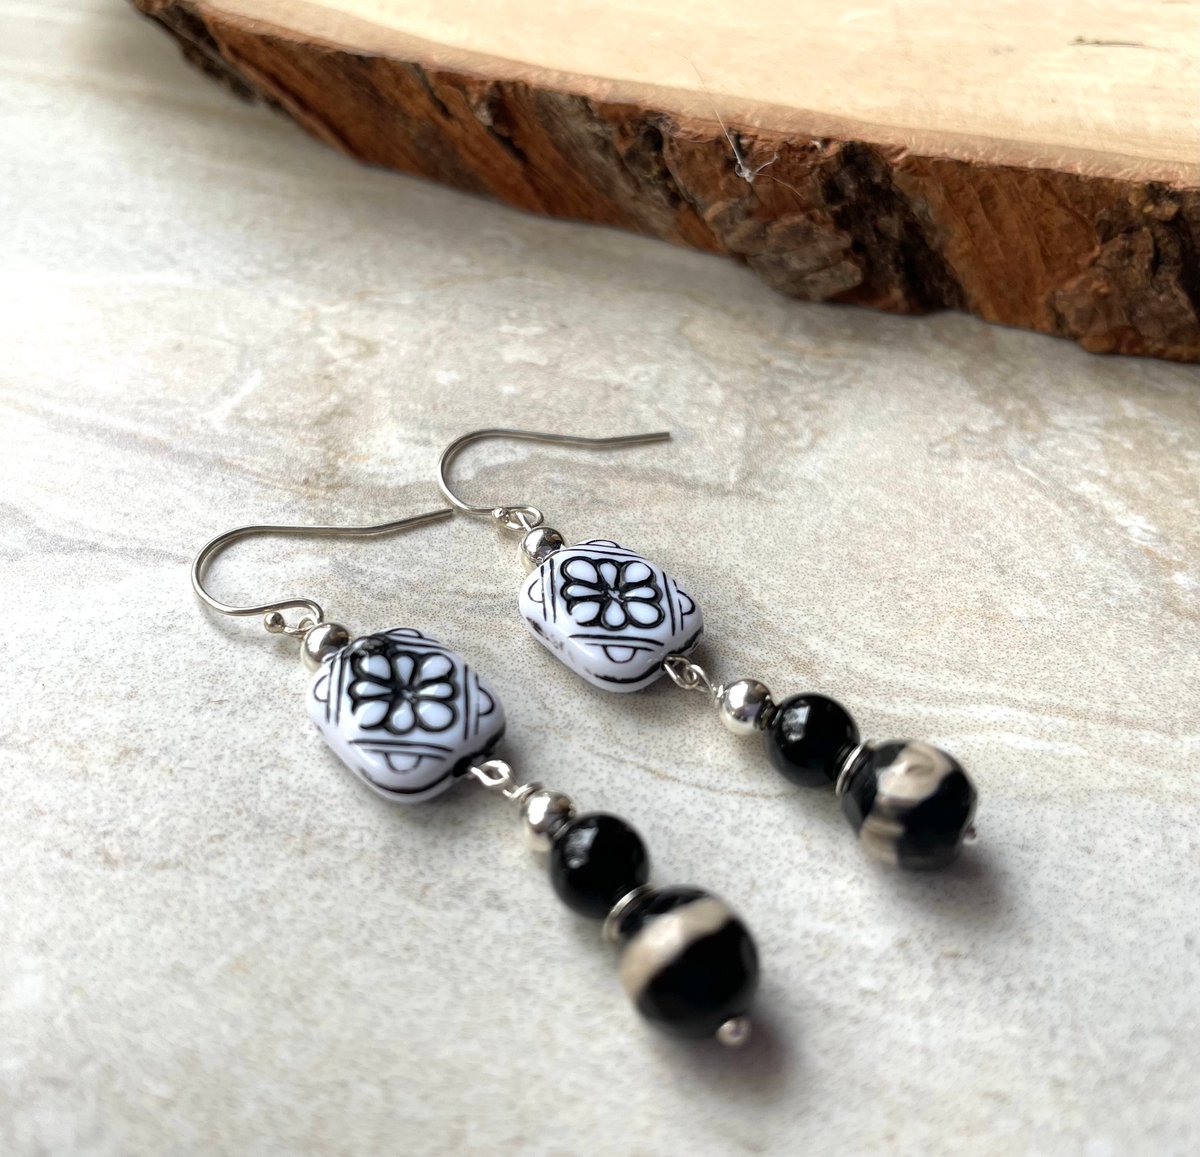 Black and White Onyx Earrings Sterling Silver and Banded Agate Floral Earrings tuppu.net/503f0409 #JemsbyJBandCompany #Jewelry trends #Handcrafted